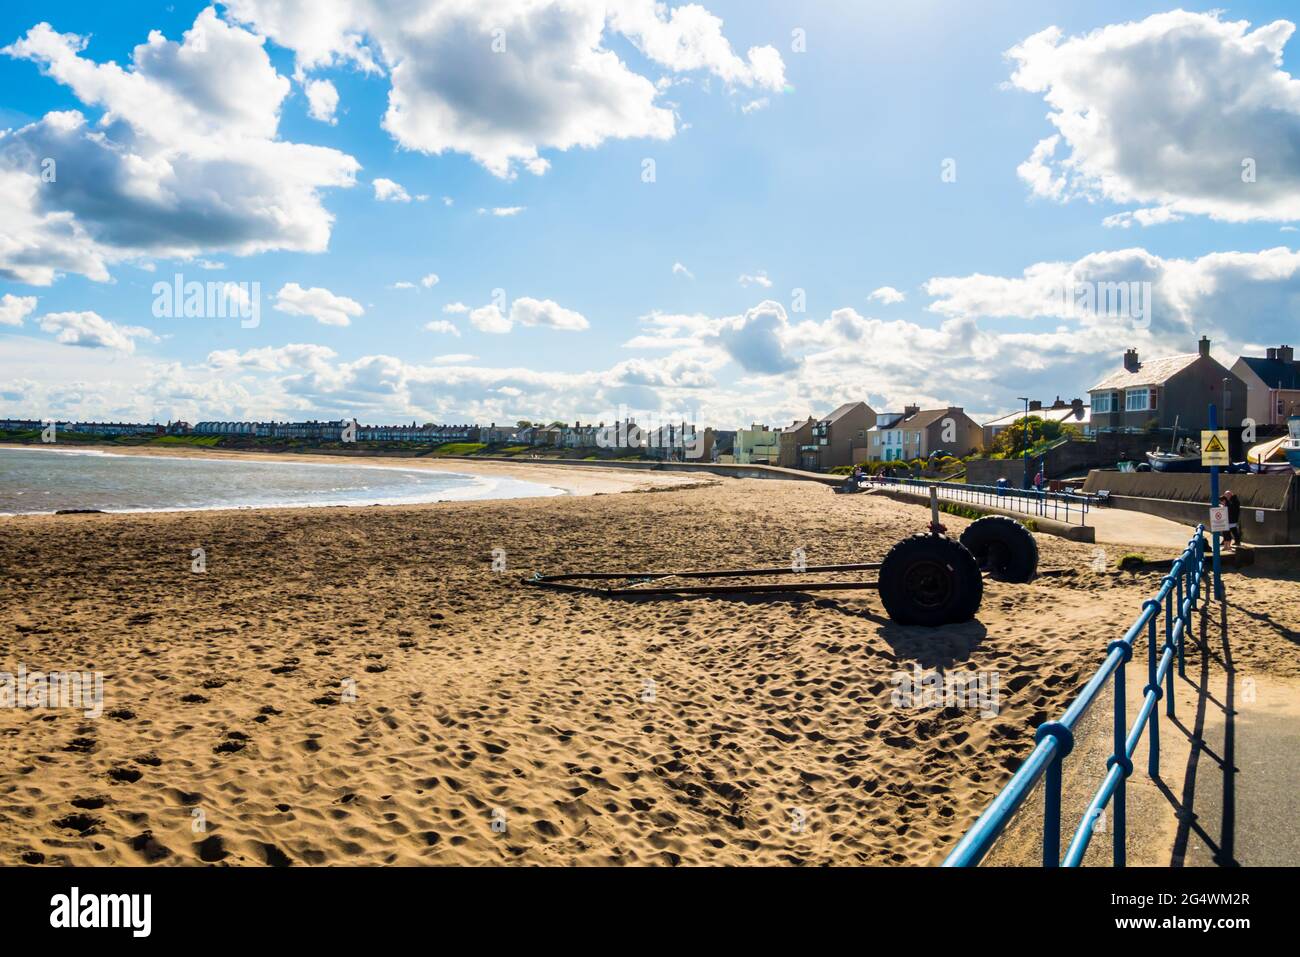 View of the Beach from the Promenade at Newbiggin-by-the-Sea Stock Photo